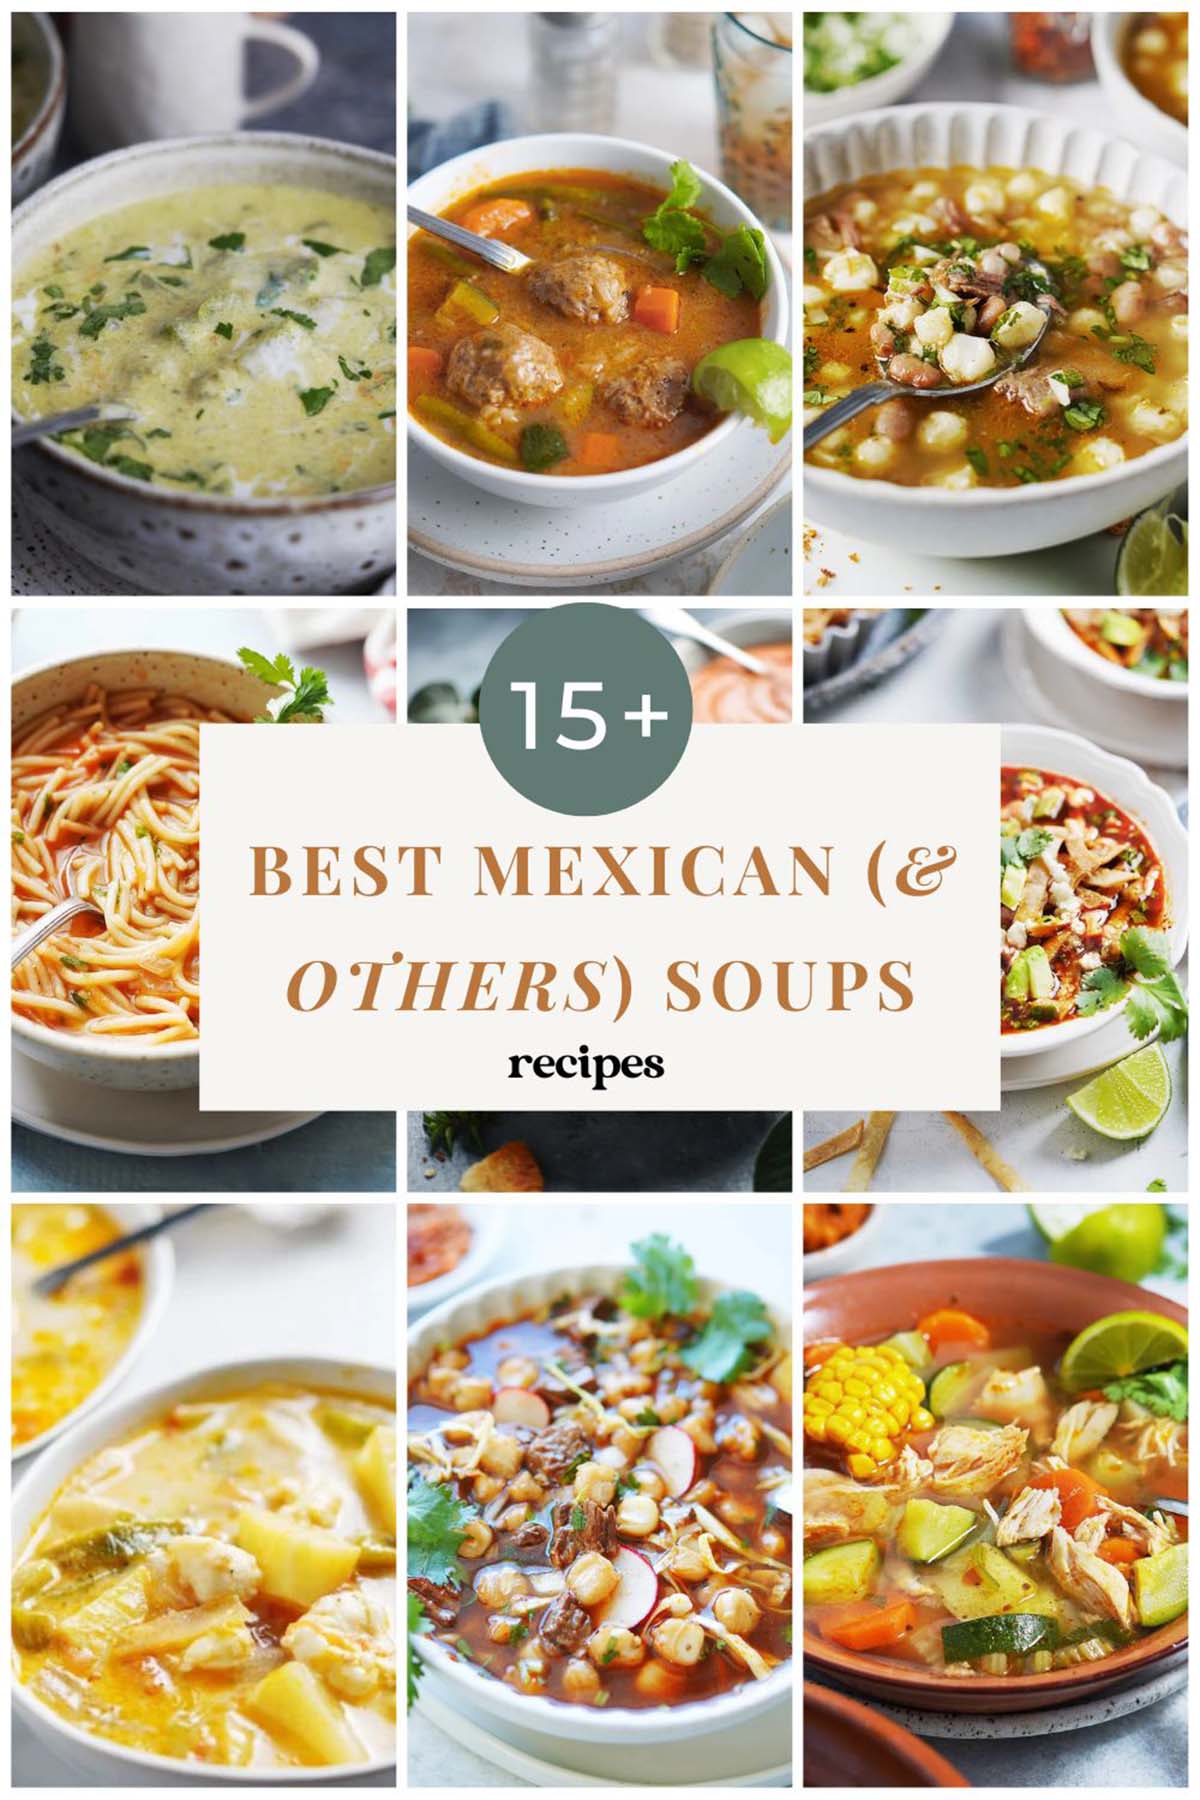 A roundup image with different mexican soups.